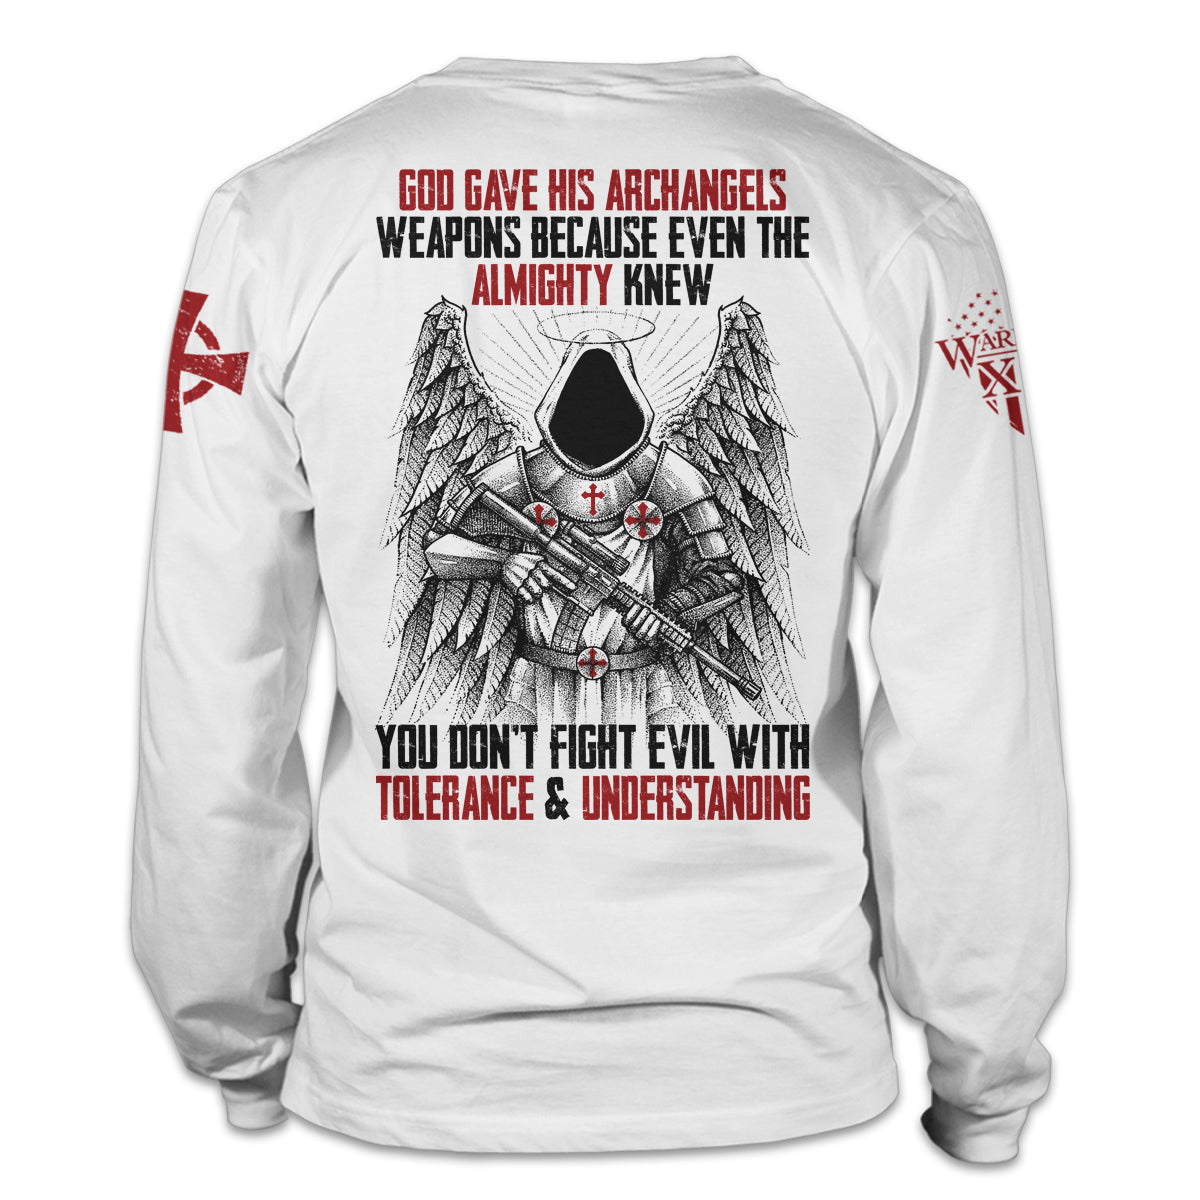 A white long sleeve shirt with the words "God gave his archangels weapons, because even the Almighty knew you don't fight evil with tolerance and understanding" with an Archangel holding a gun printed on the back of the shirt.